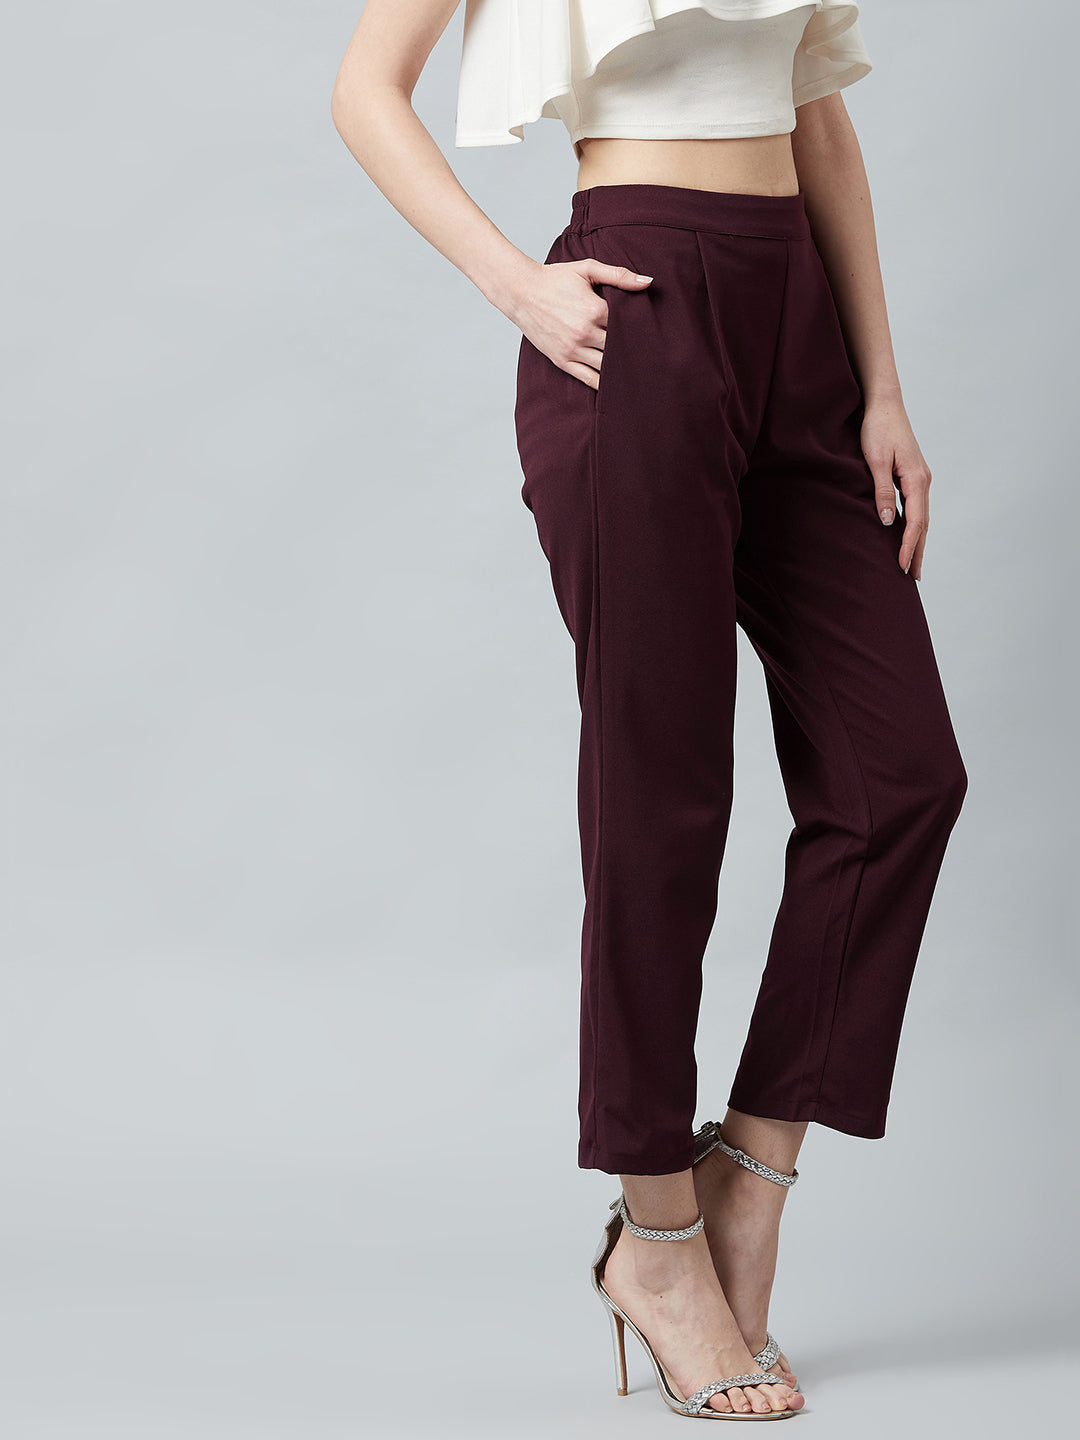 Online Shopping India Online Fashion for Womens Trousers Harem Pants  Afghani Capris Salwar  Harem pants women Trousers women Harem pants